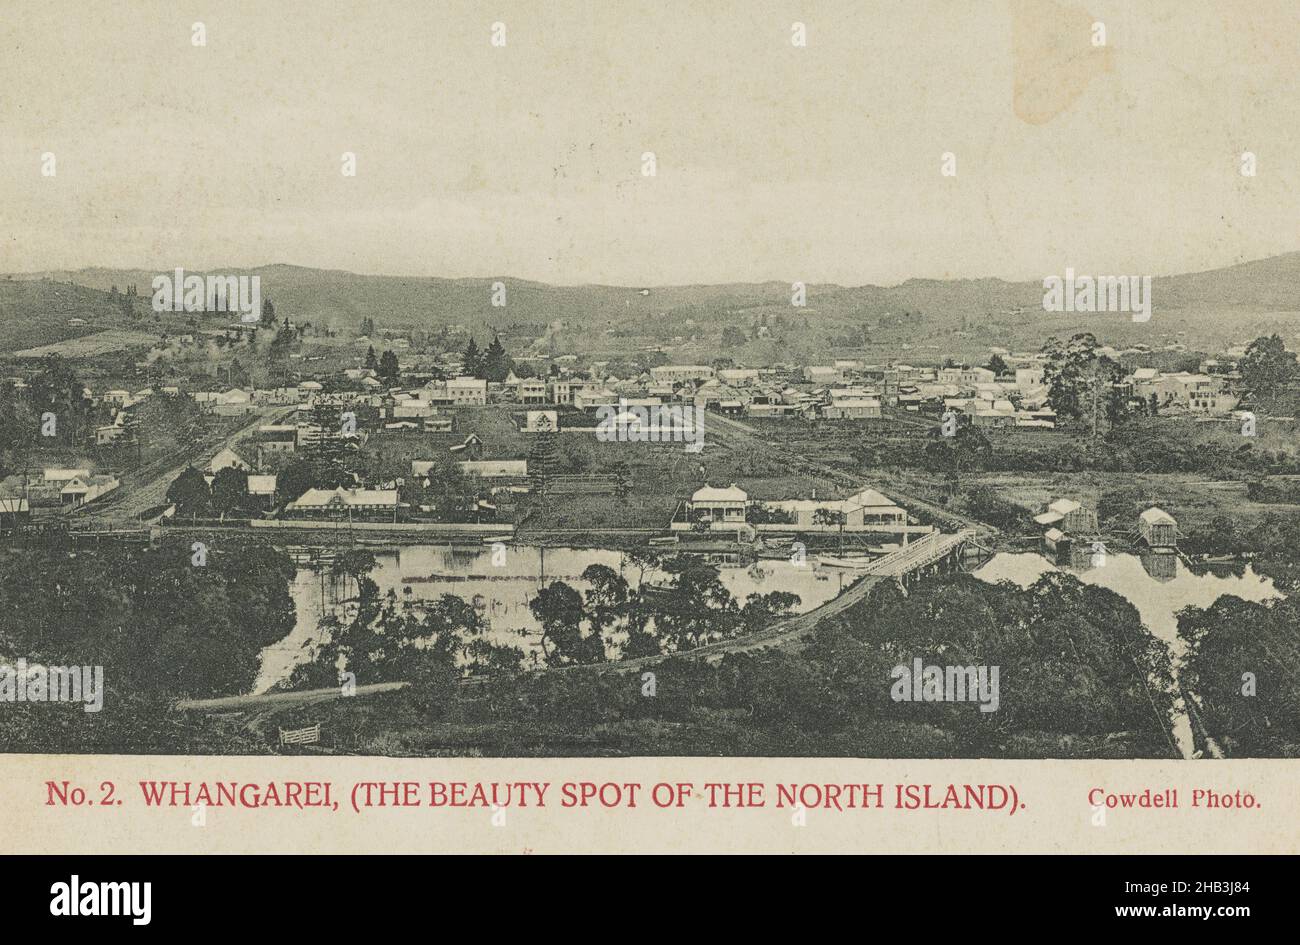 Whangarei (The Beauty Spot of the North Island), Muir & Moodie studio, publisher, 1900-1903, Dunedin, collotype, View from hillside of township, road leading into town is in sight in the foreground. Also in sight in the foreground are river waters and the bridge that spans them Stock Photo